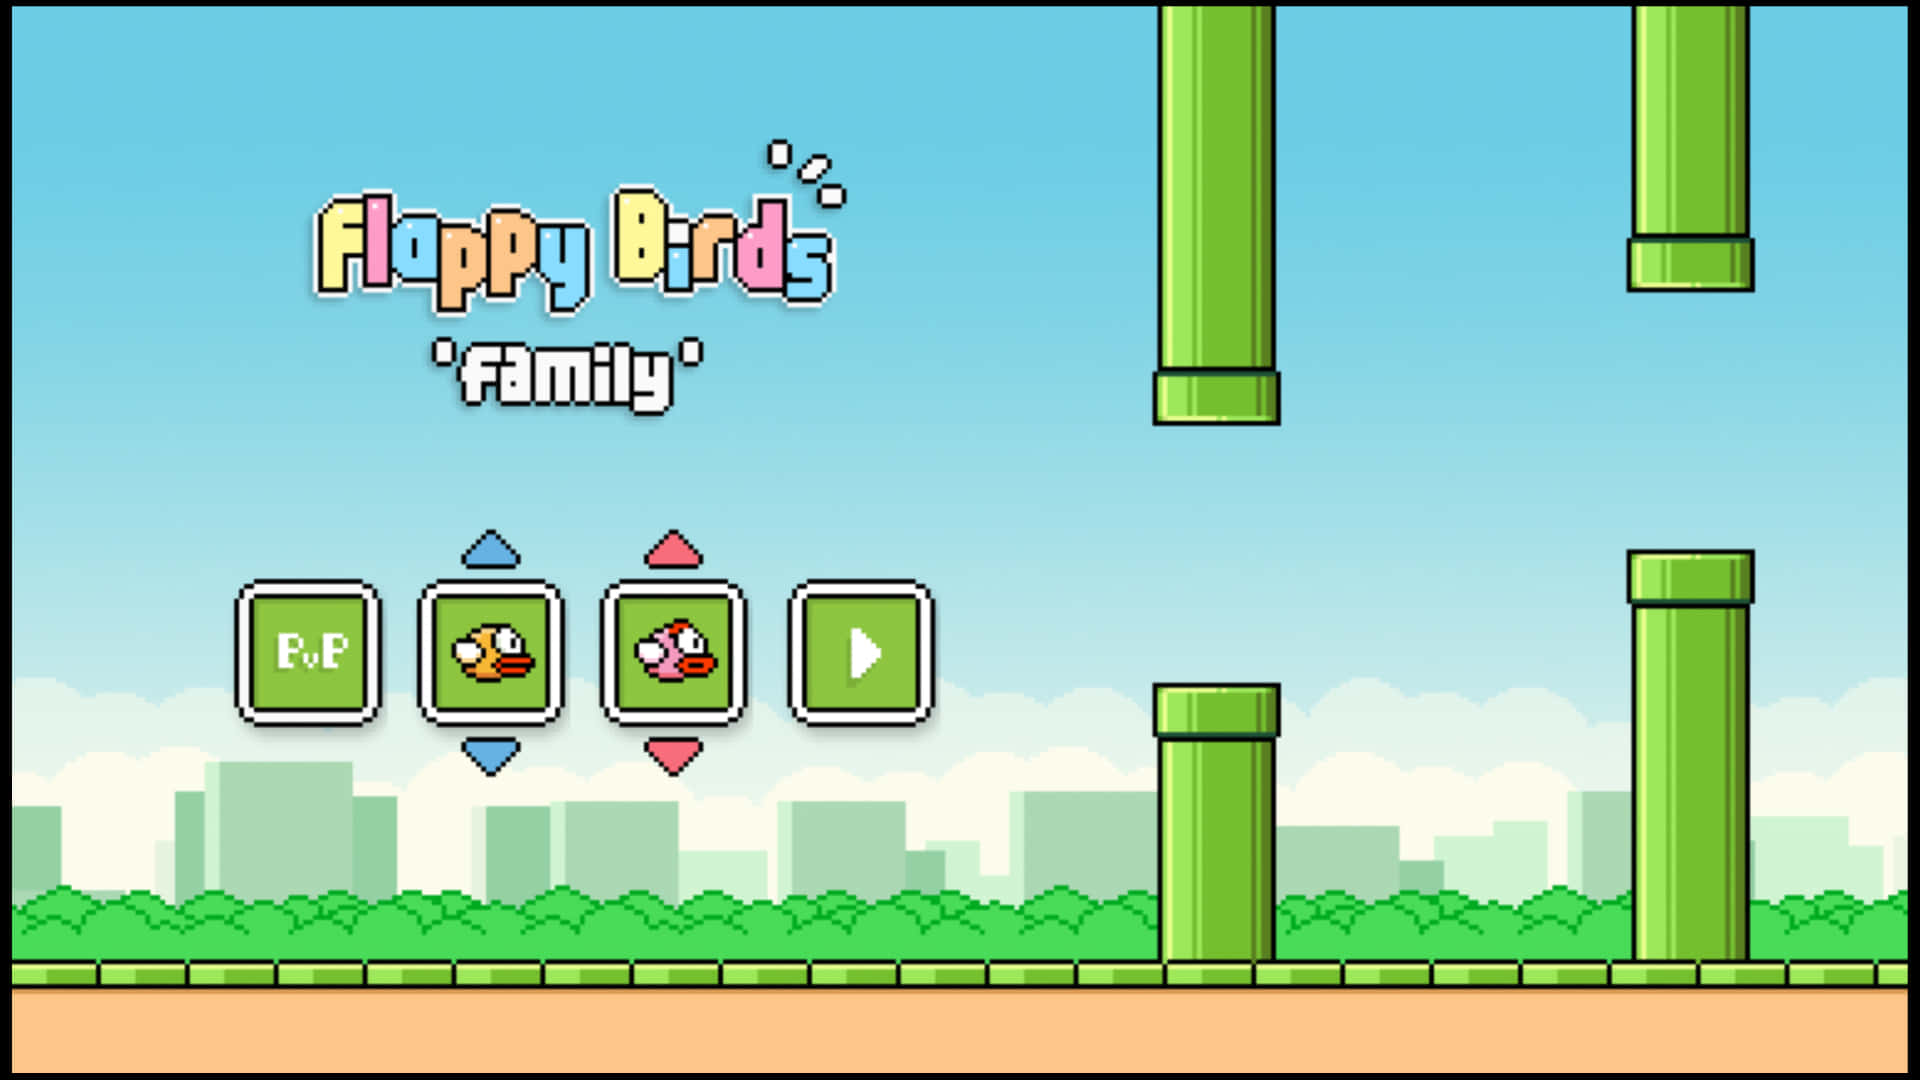 Fly High with Flappy Bird